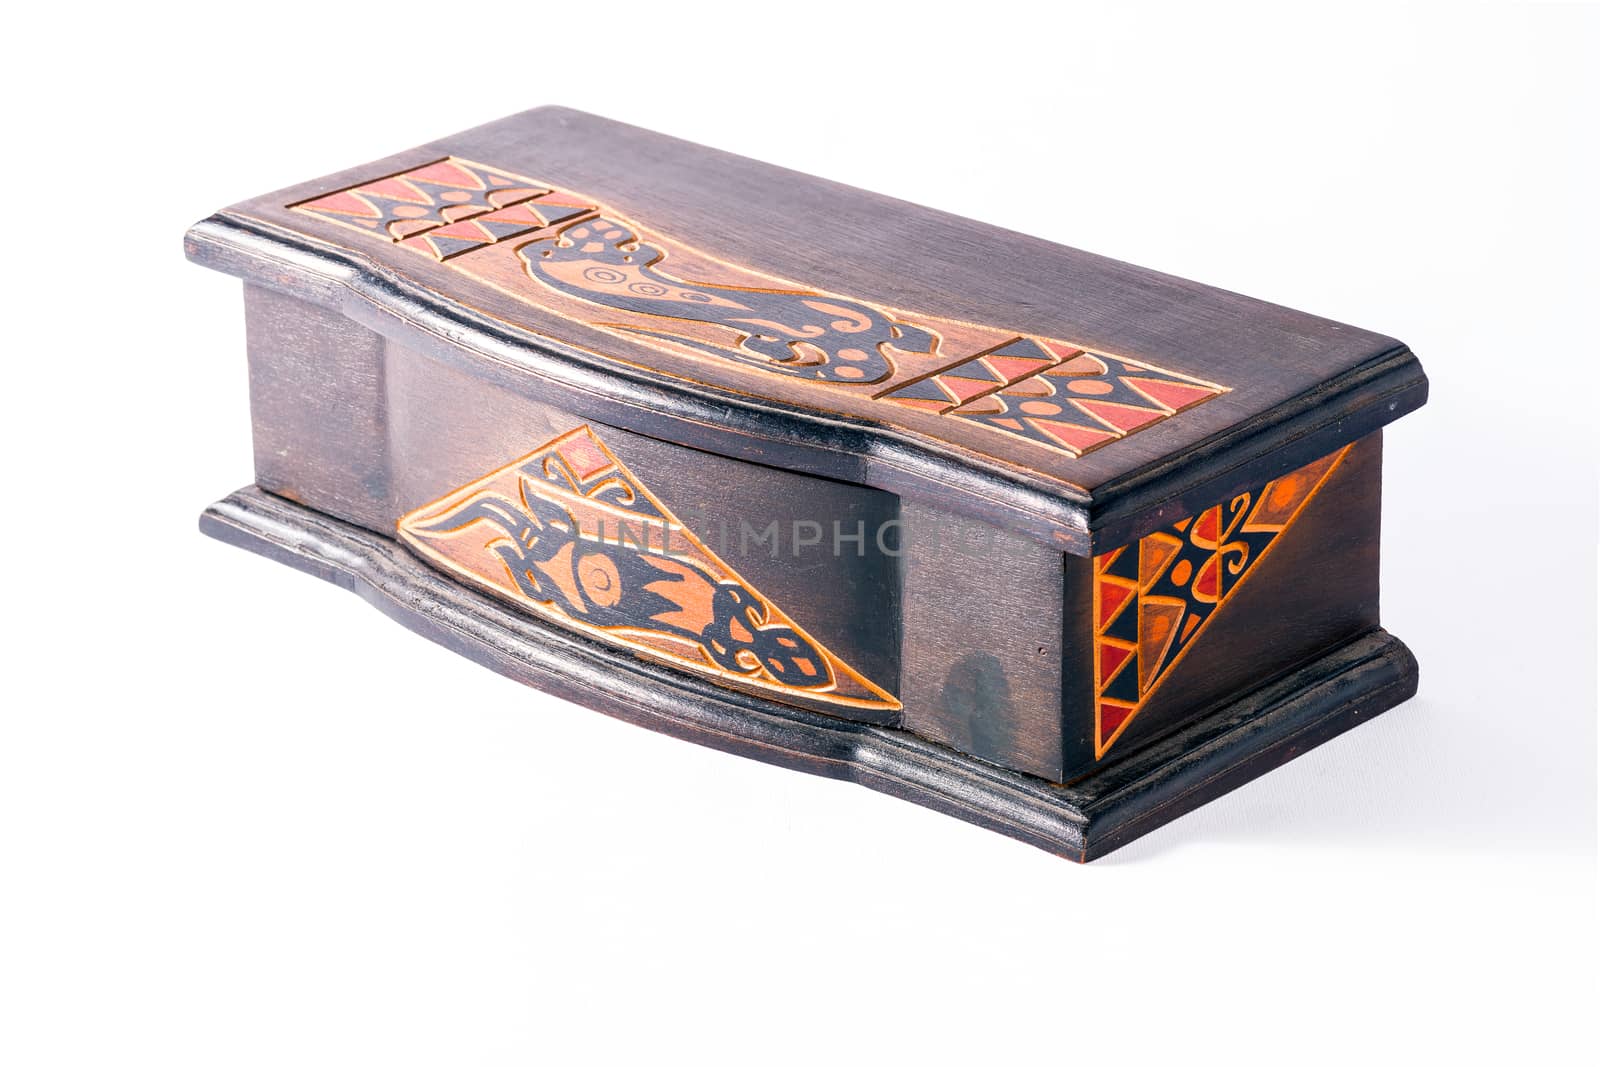 A view of close wodden carved box.